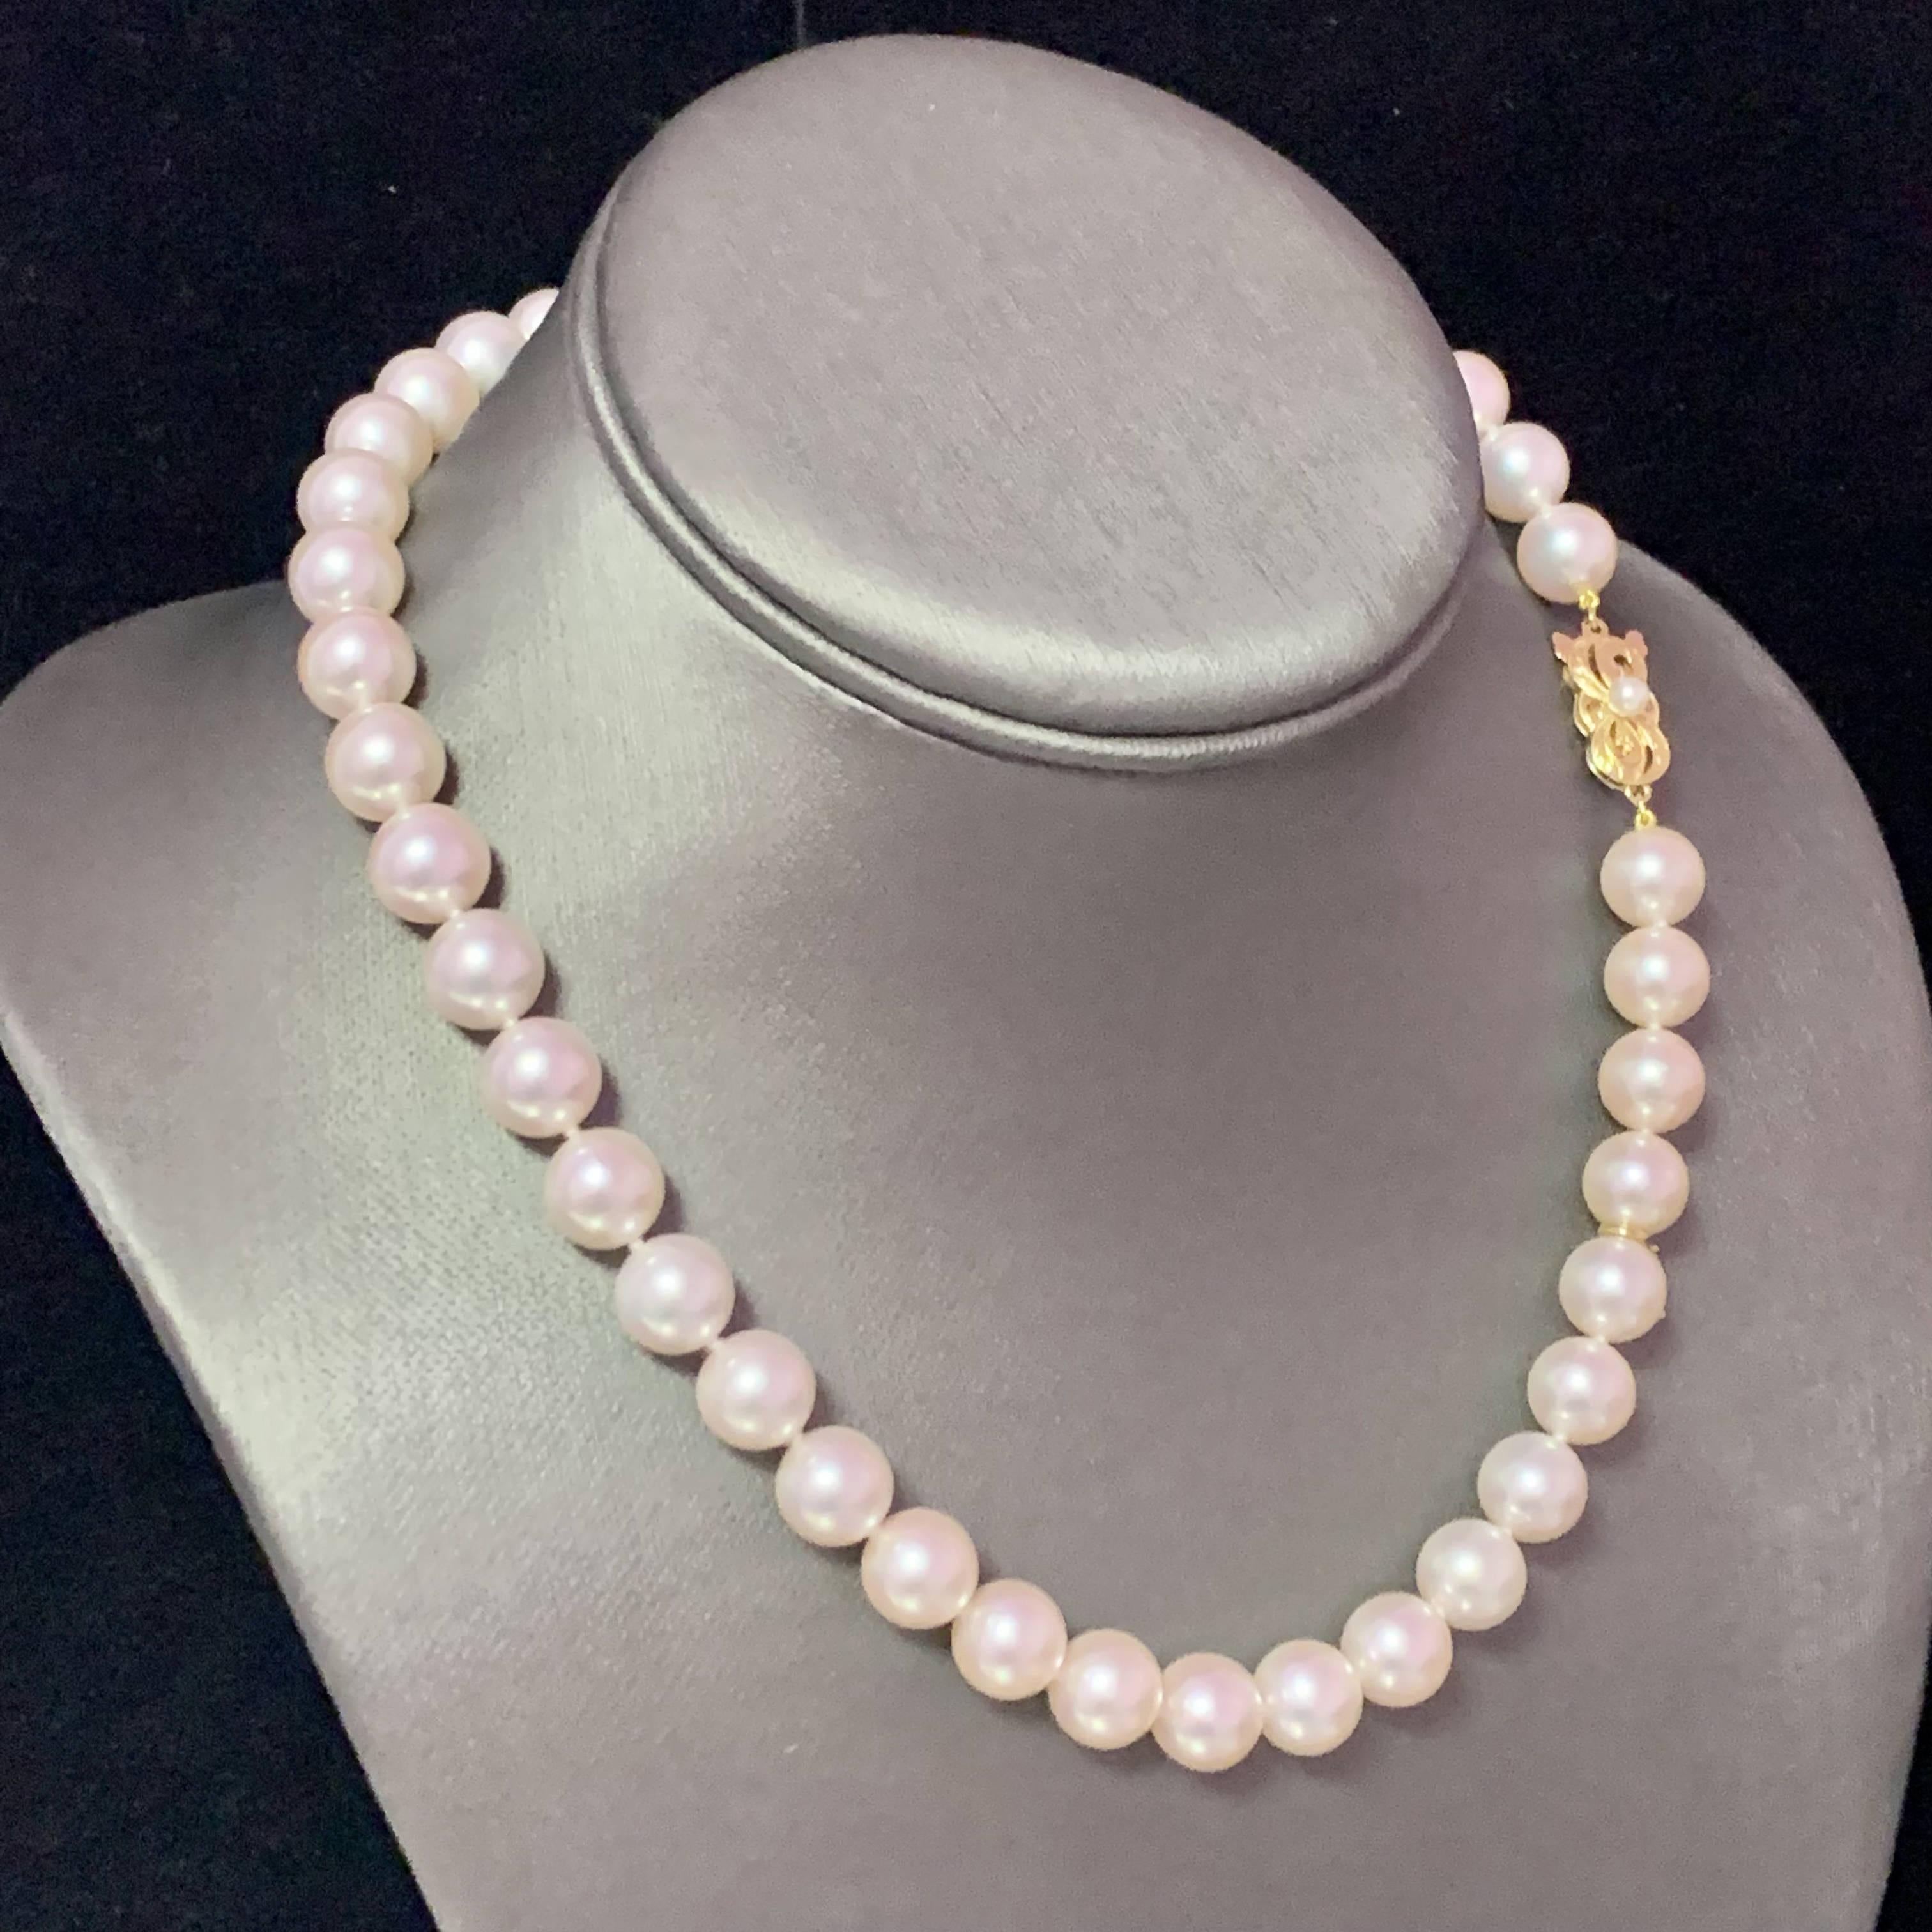 Certified and Appraised by Mikimoto in New York for the amount of $43,910

Estate Mikimoto 41 Pearls LARGE 9.9-9.5 mm 17 Inches 18k Yellow Gold Clasp

TRUSTED SELLER SINCE 2002

PLEASE REVIEW OUR 100% POSITIVE FEEDBACKS FROM OUR HAPPY